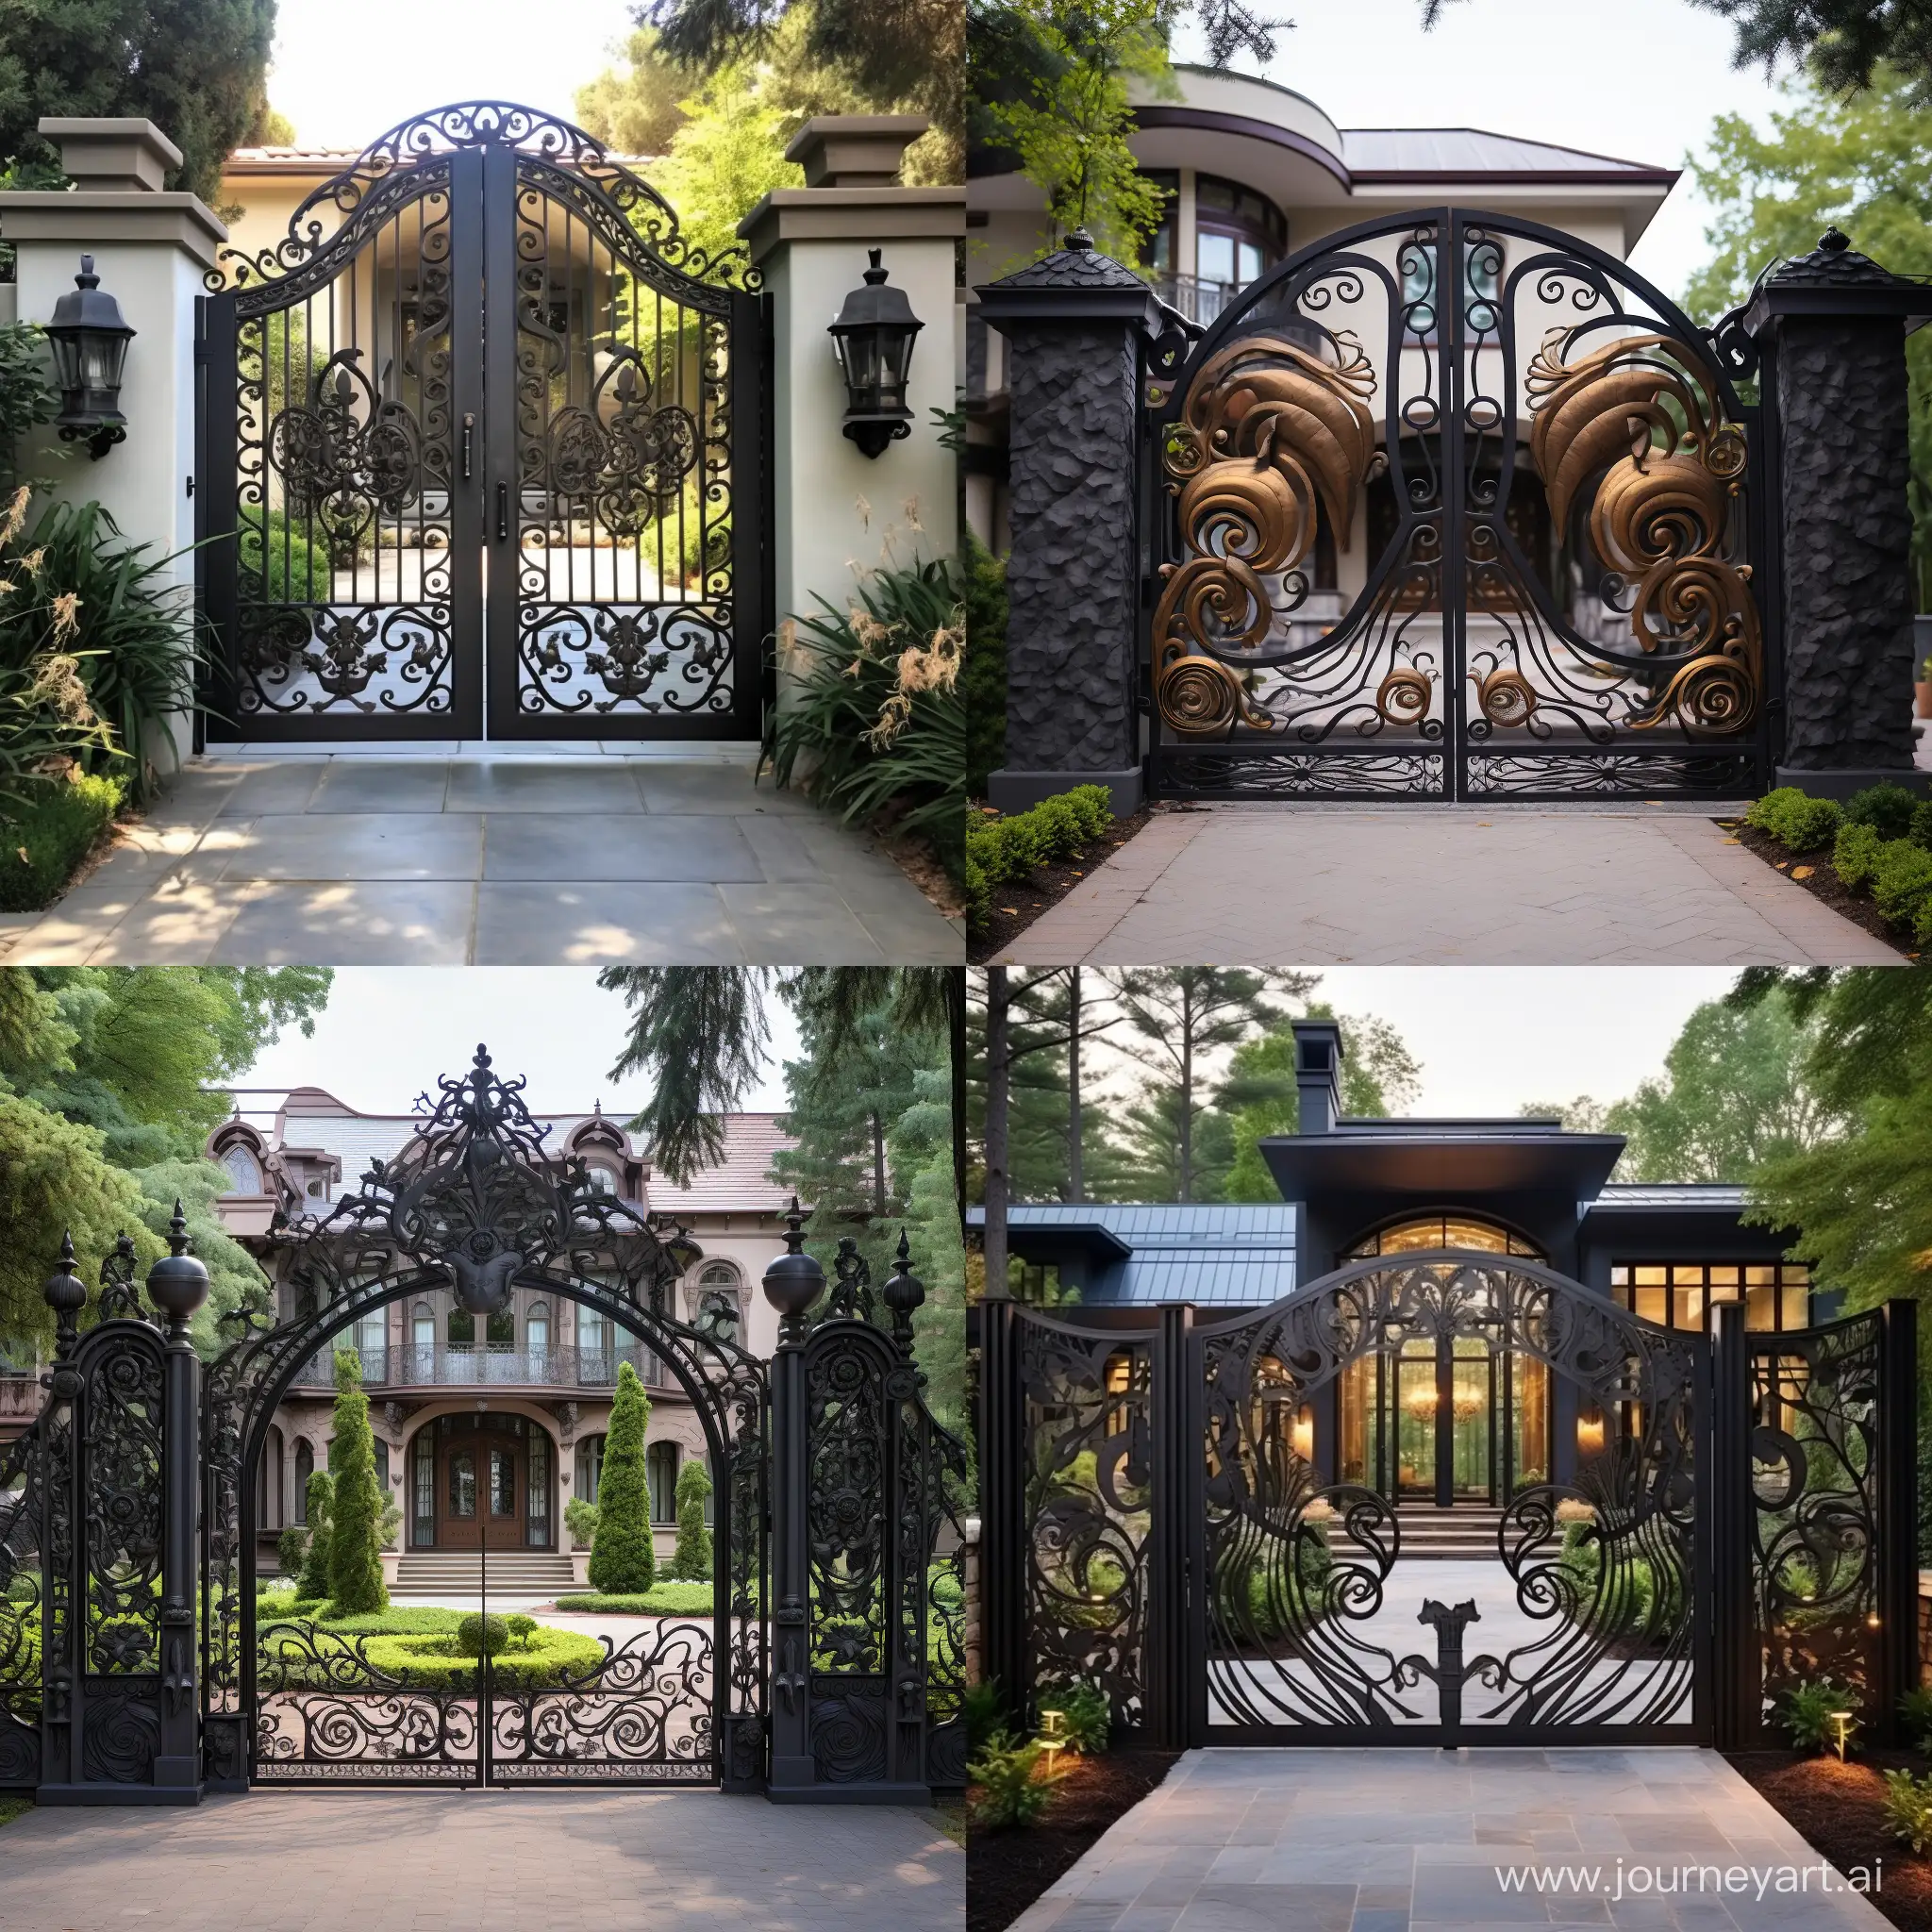 Elegant-Wrought-Iron-Entrance-Gate-Architectural-Beauty-in-a-Square-Frame